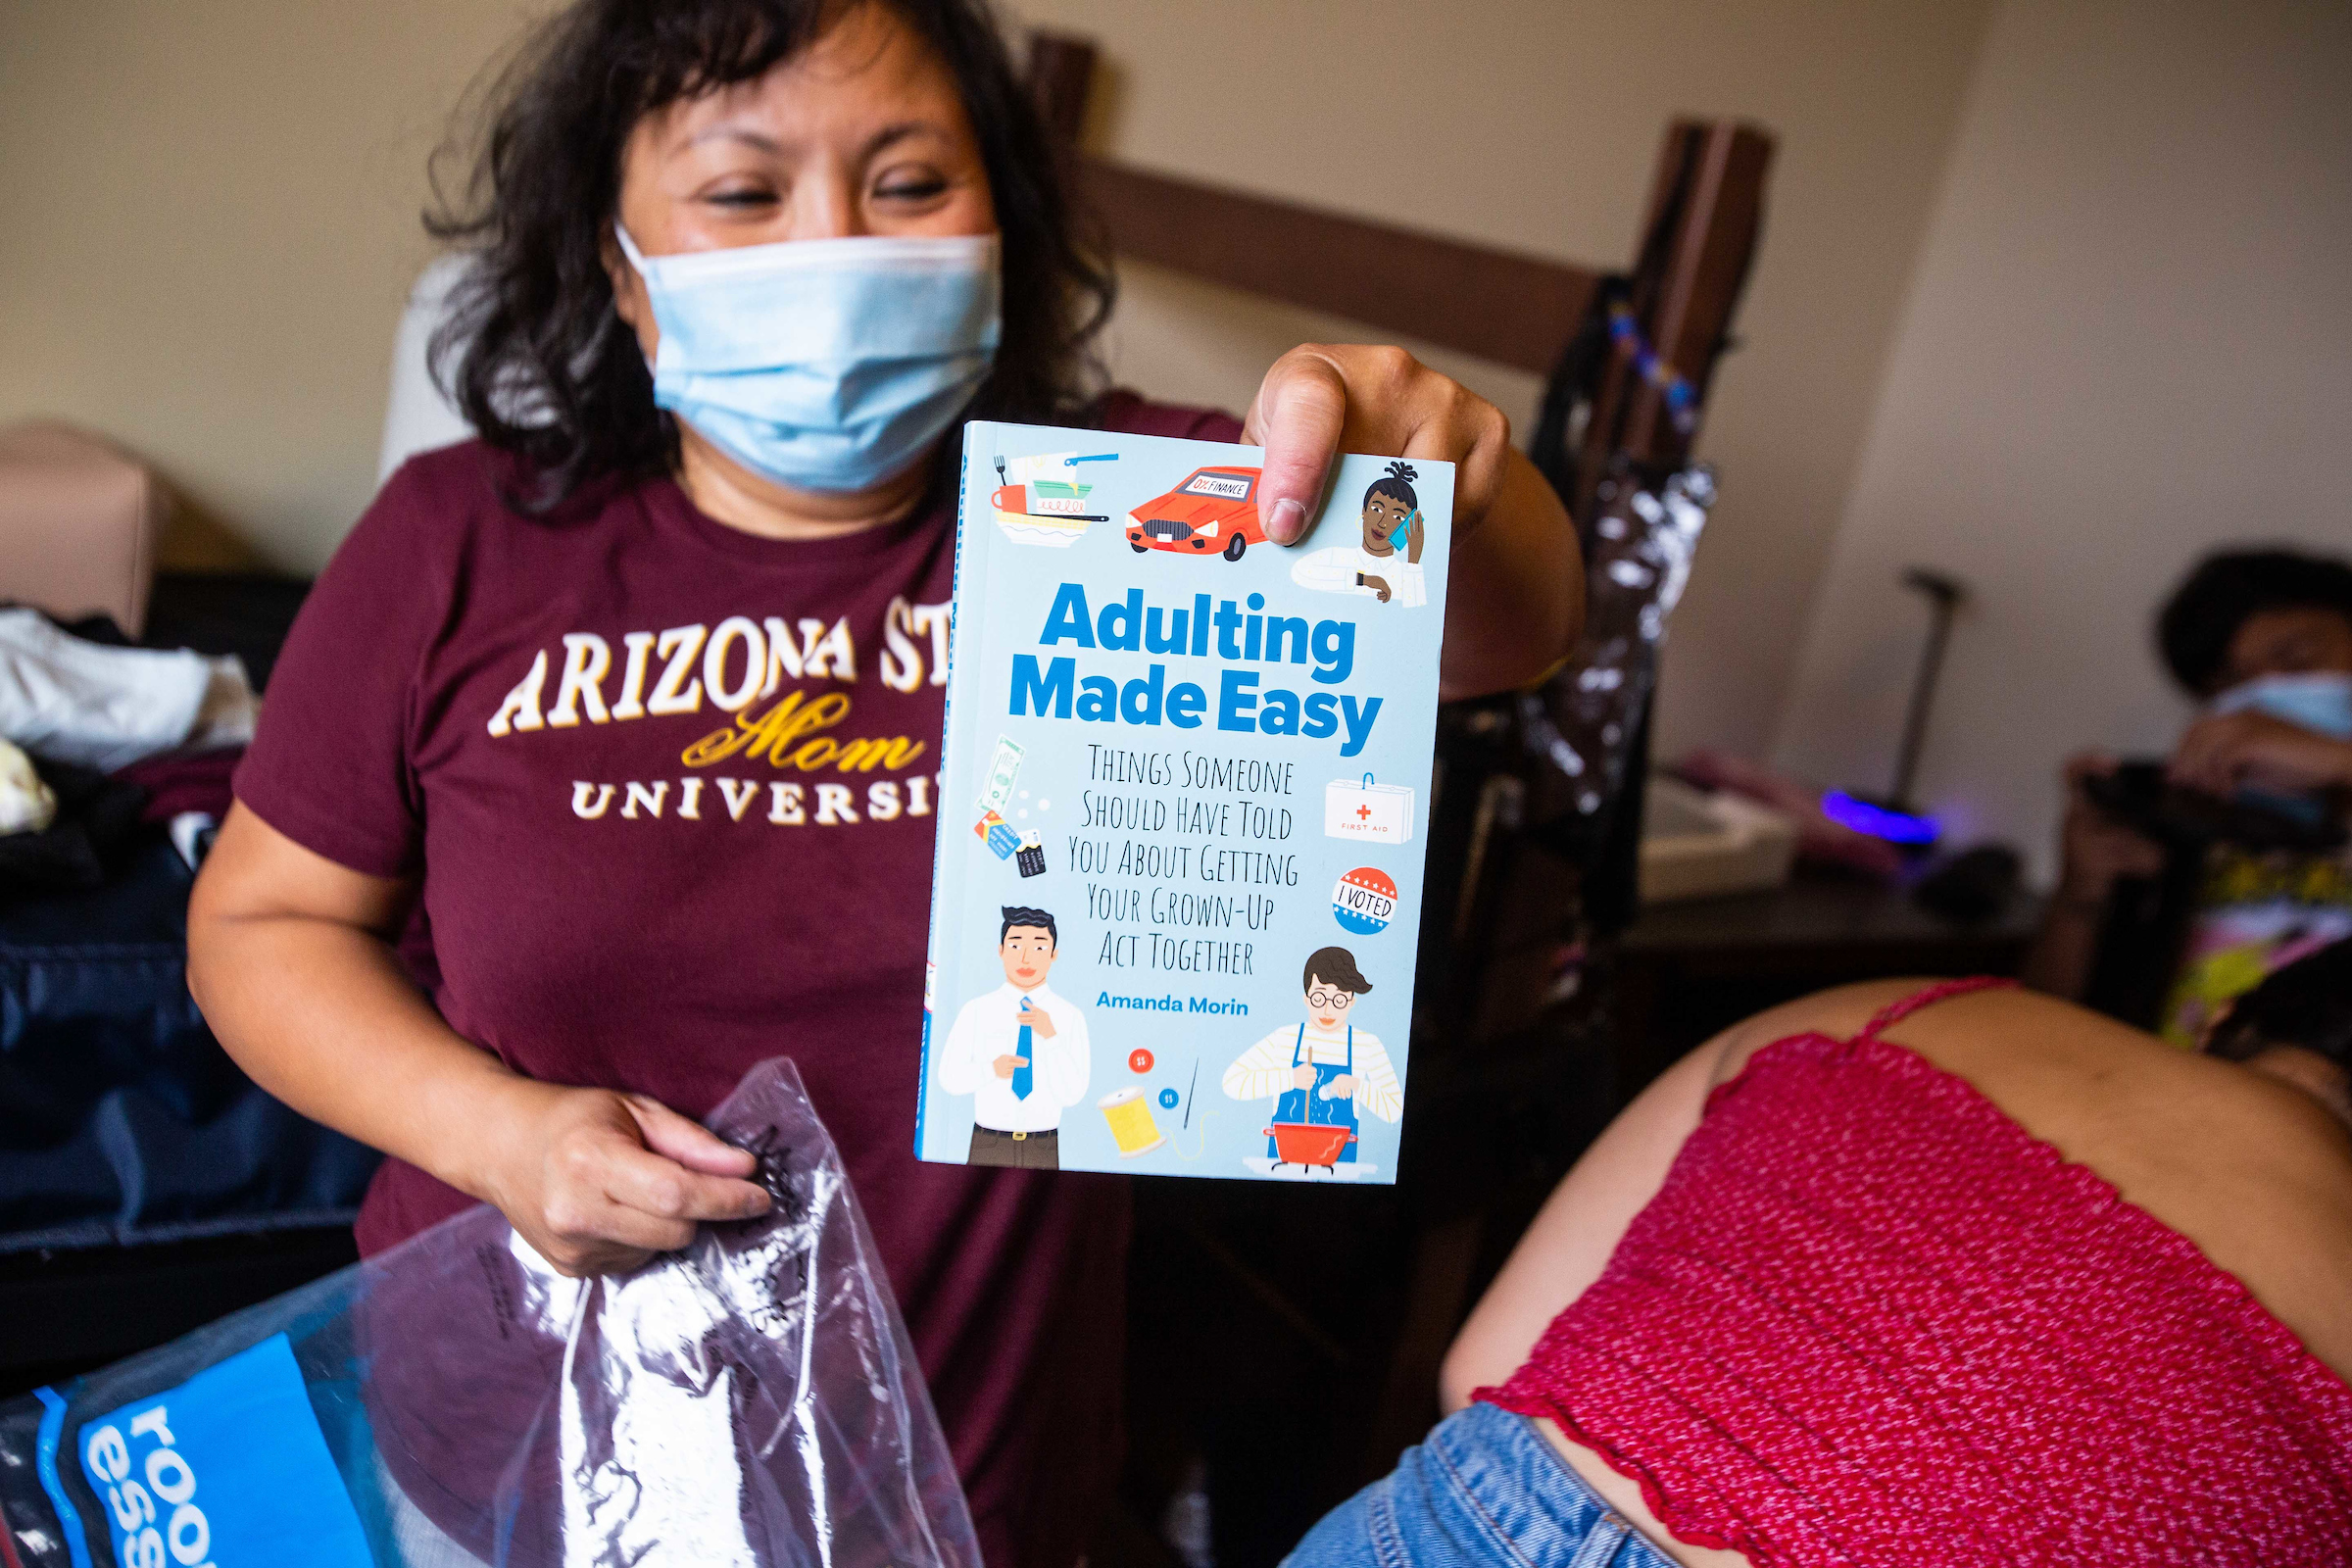 woman holding a book titled "Adulting Made Easy"